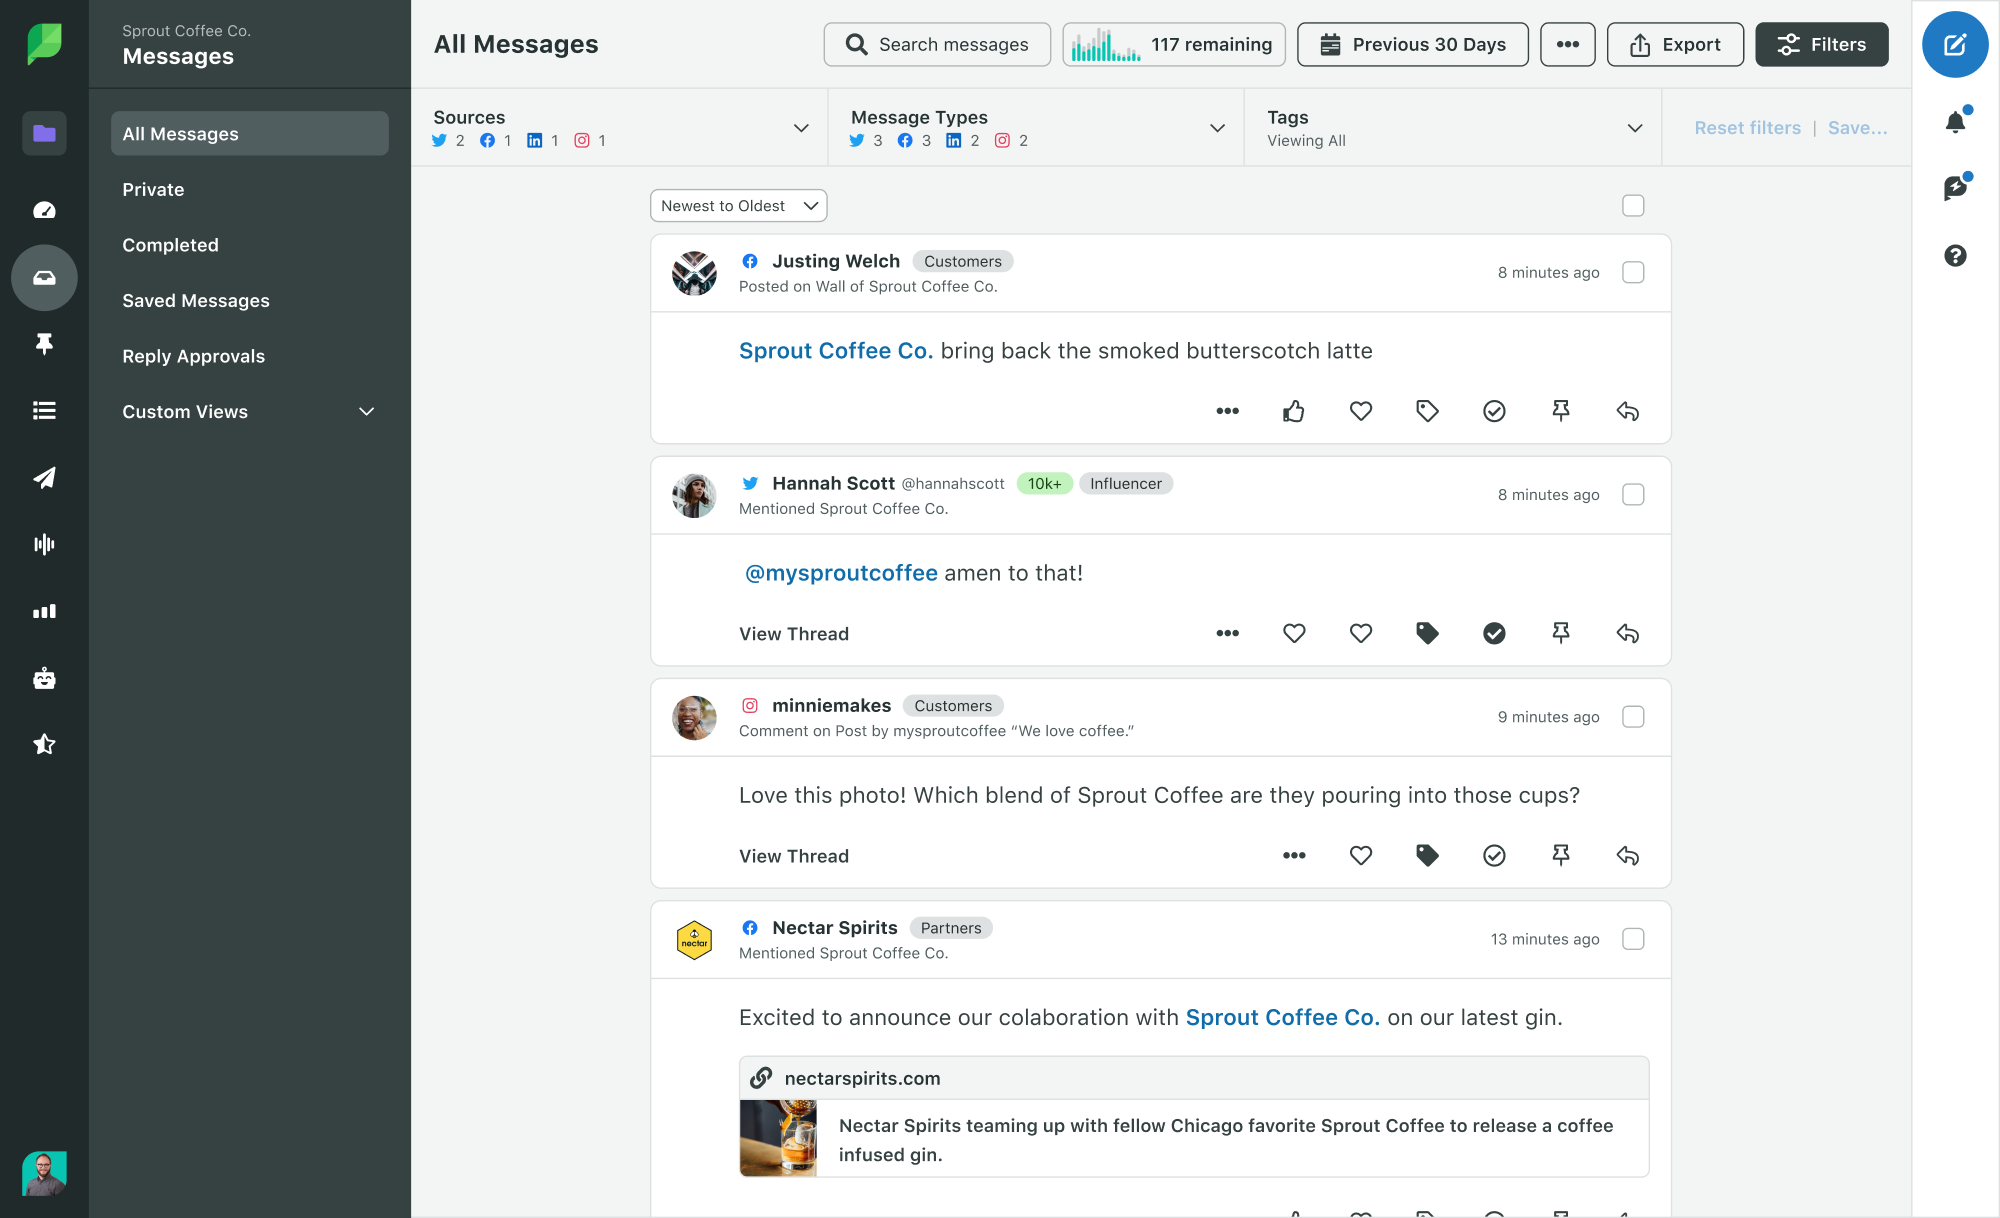 Sprout Social's Smart Inbox, an inbox within the platform that consolidates all incoming messages and mentions into one place.